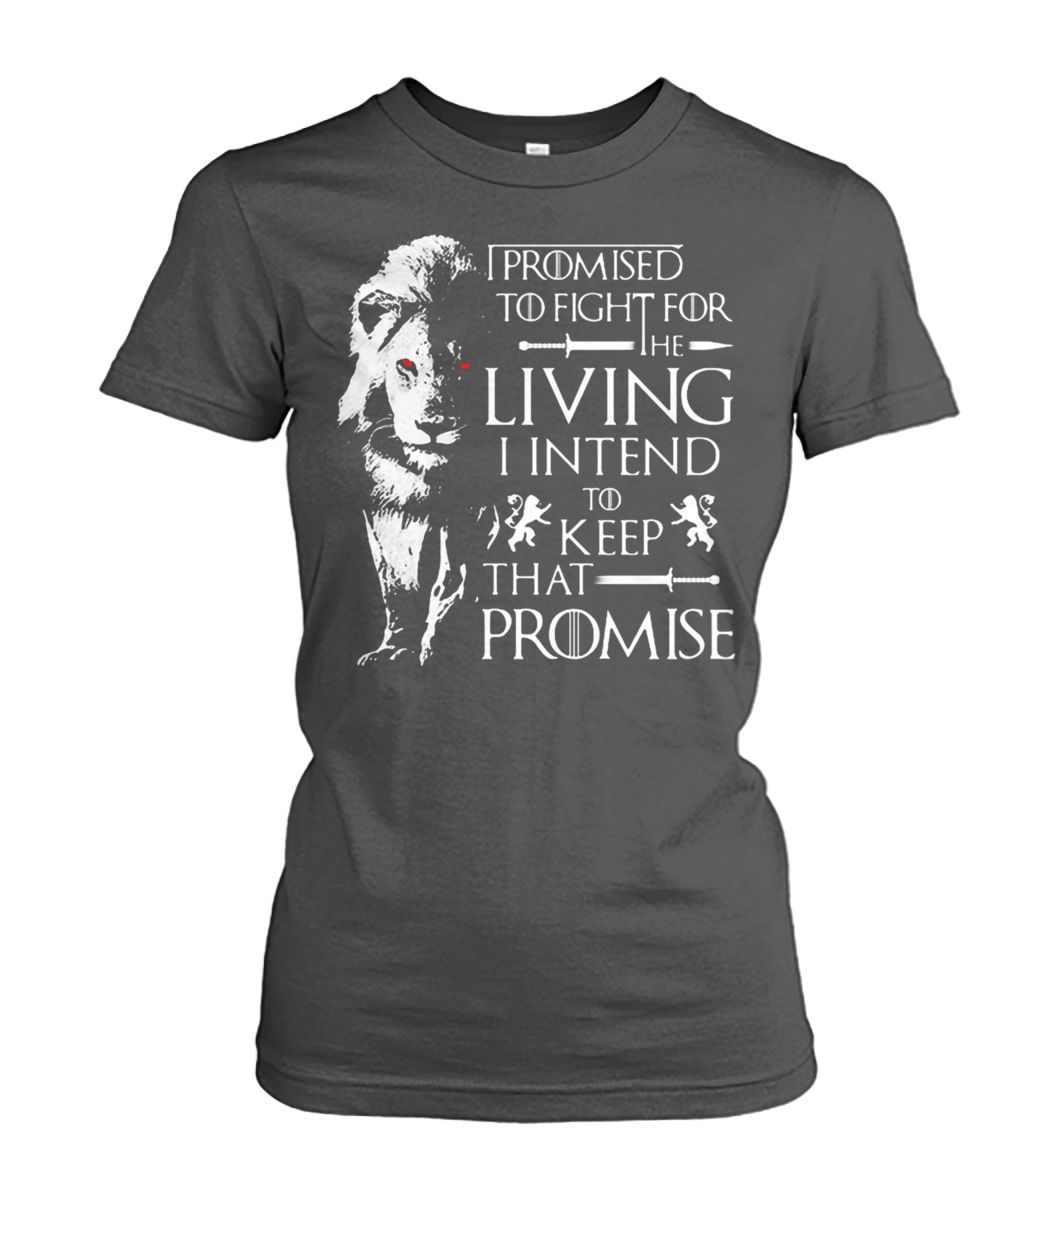 Game of thrones jaime lannister lion I promised to fight for the living I intend to keep that promise women's crew tee